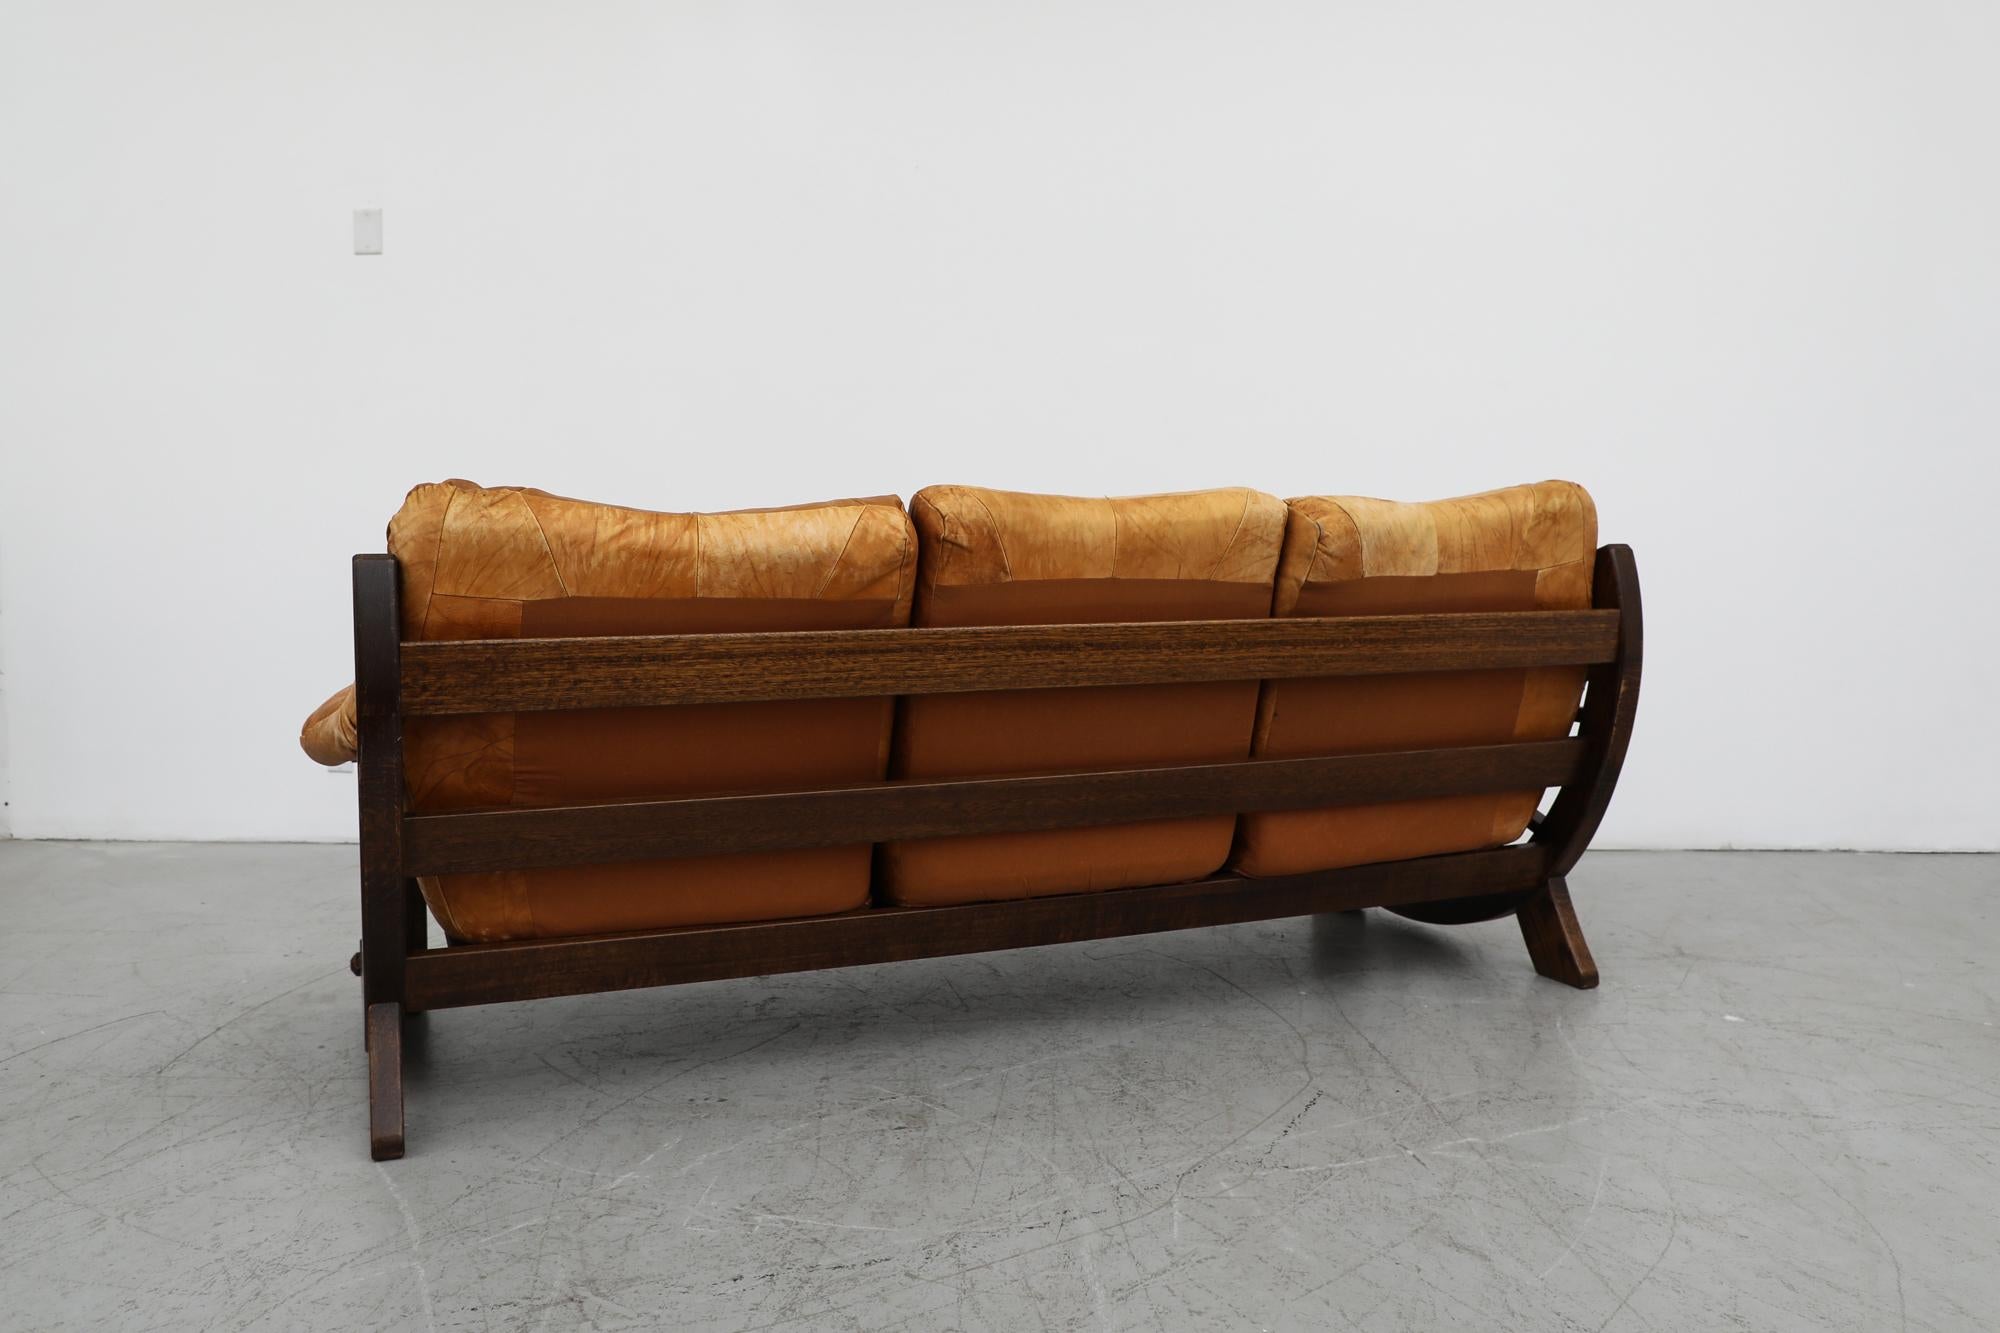 Dutch Mid-Century Brutalist Brown Leather Patchwork Sofa with Western Style Wood Frame For Sale